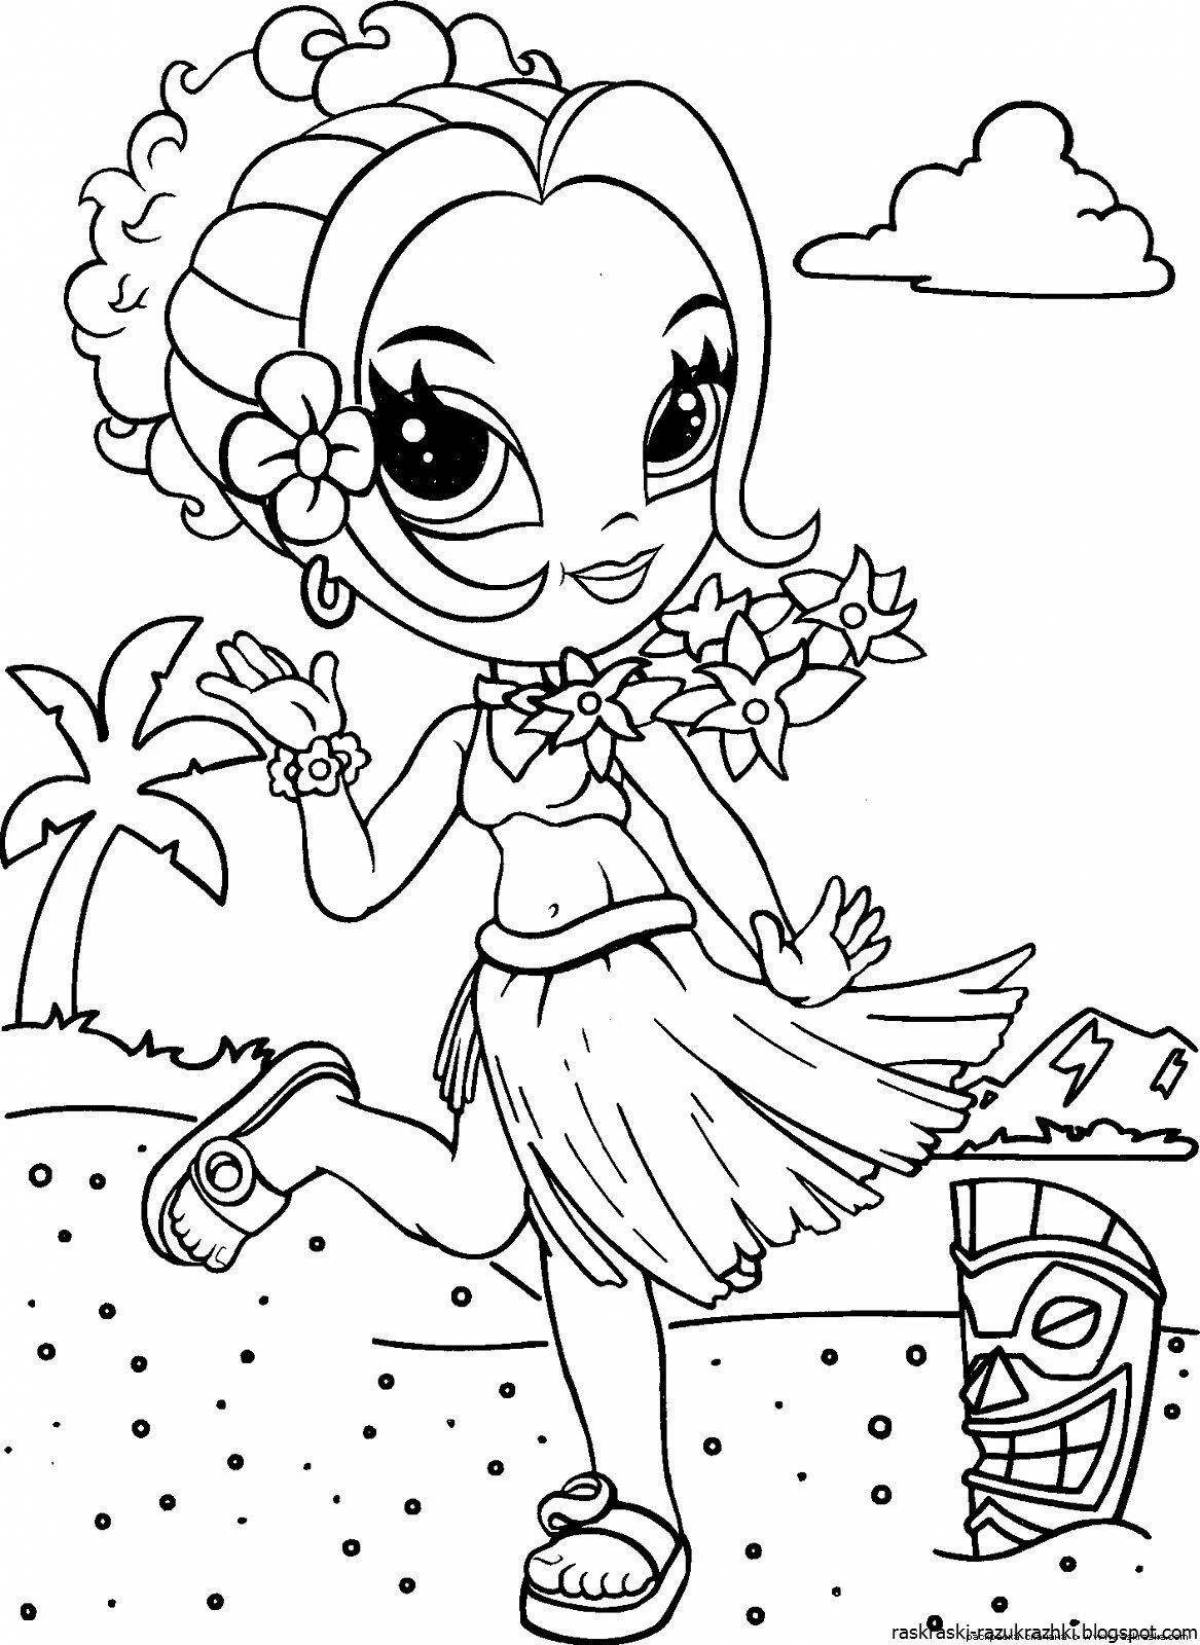 Exquisite coloring book for 6 year old girls